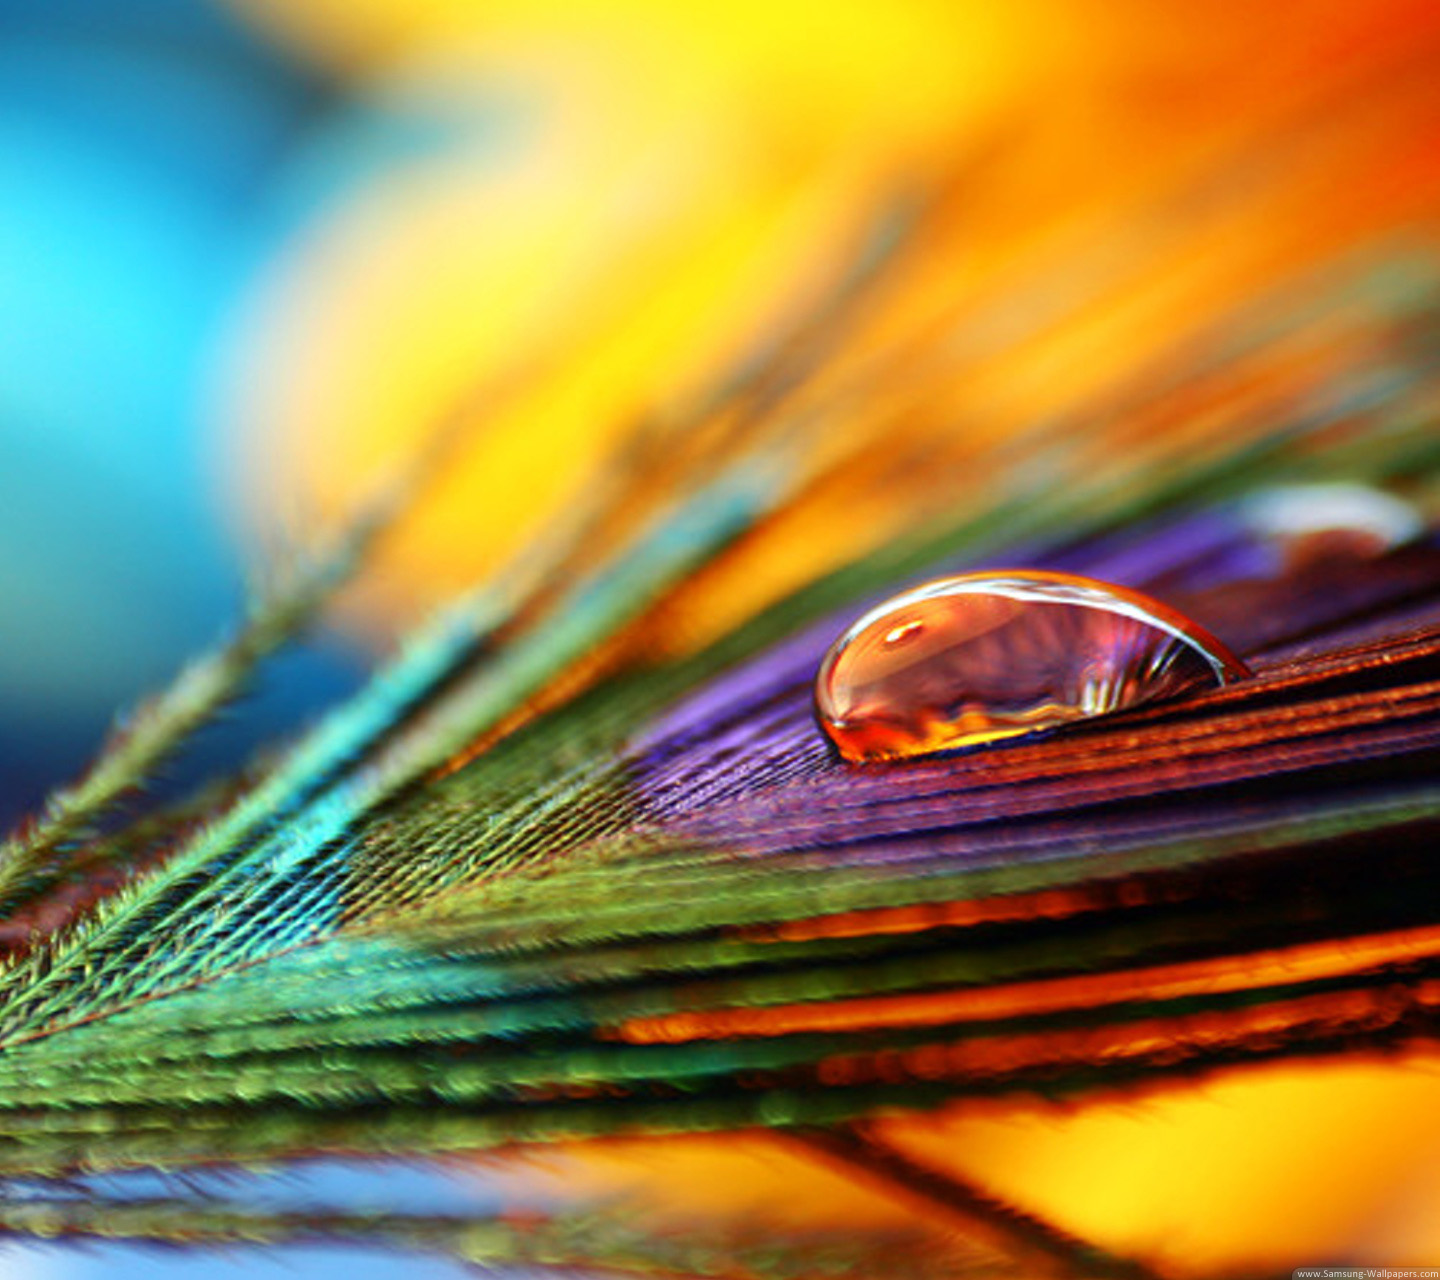 home screen wallpaper download,macro photography,close up,water,colorfulness,feather